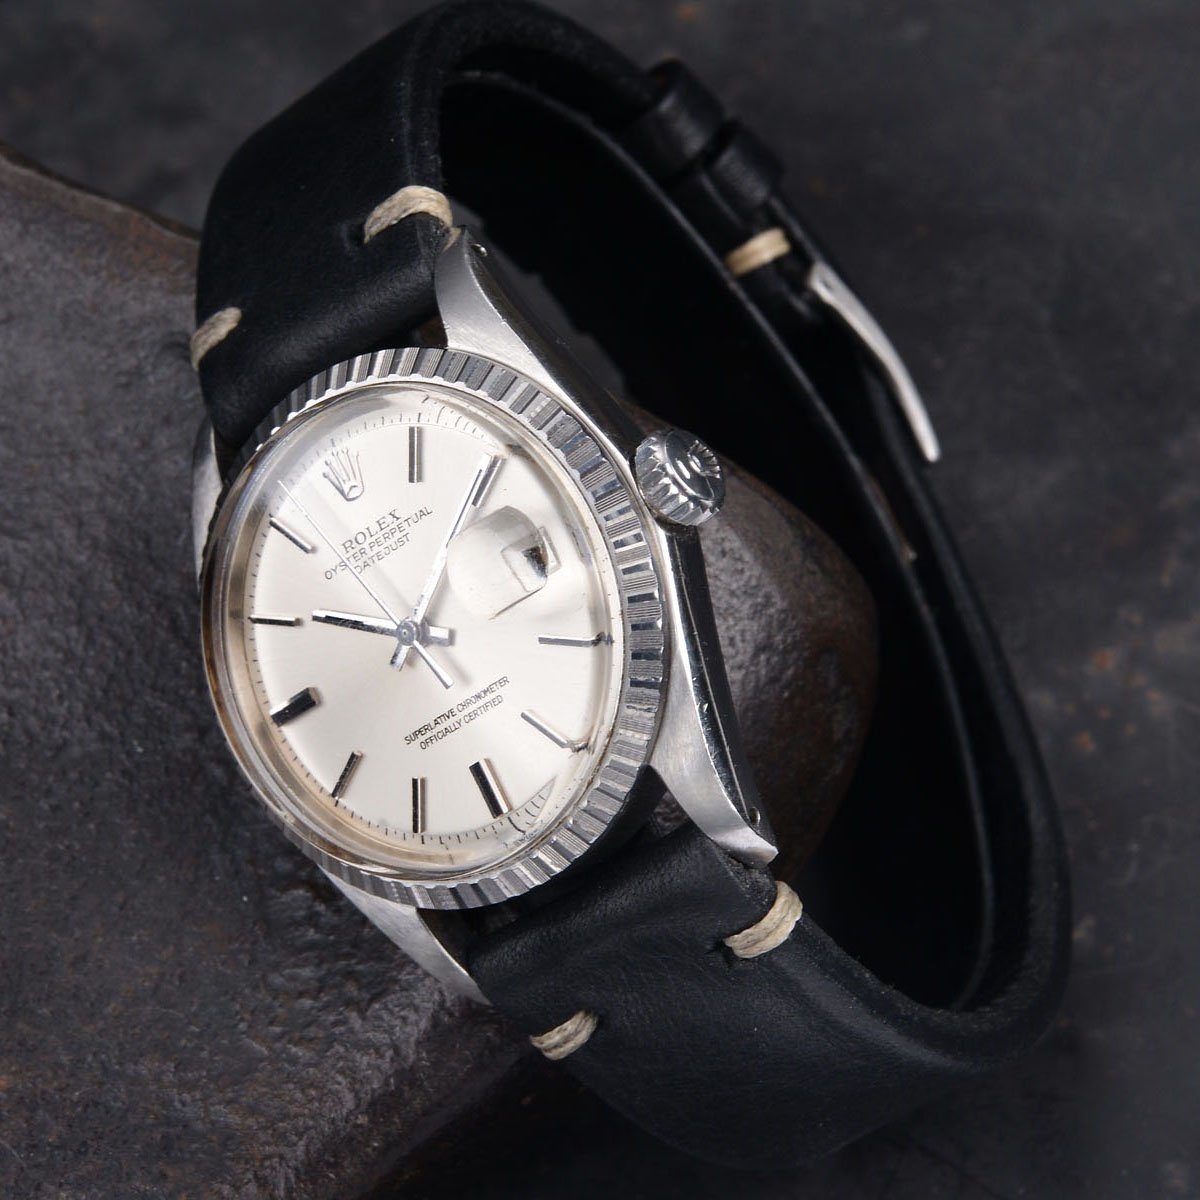 ROLEX 1603 DATEJUST SILVER DIAL 1978